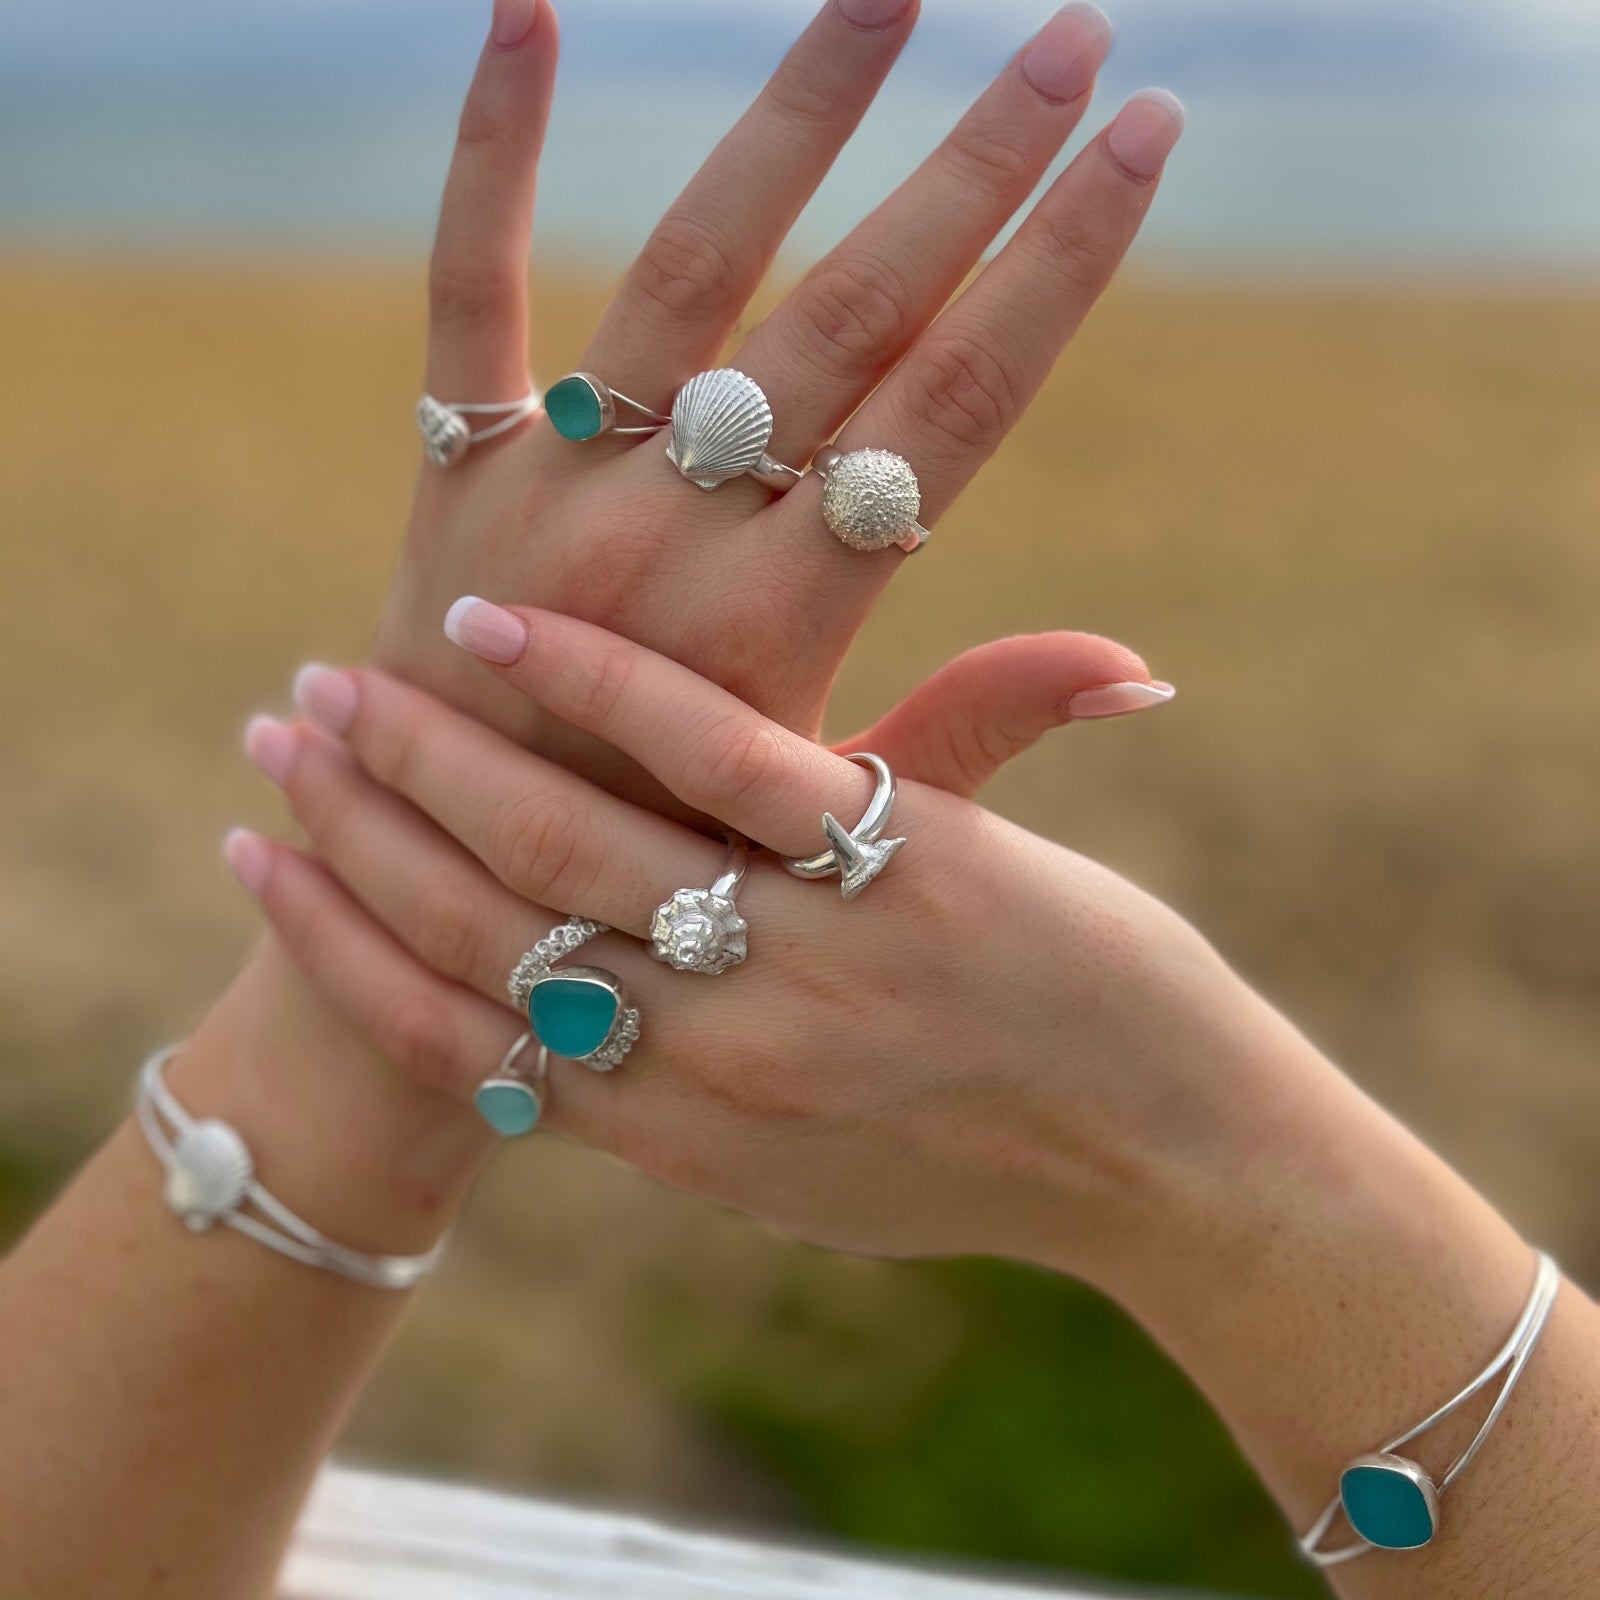 Hands modelling sea glass and cast silver shell rings and bangles by Mornington Sea Glass